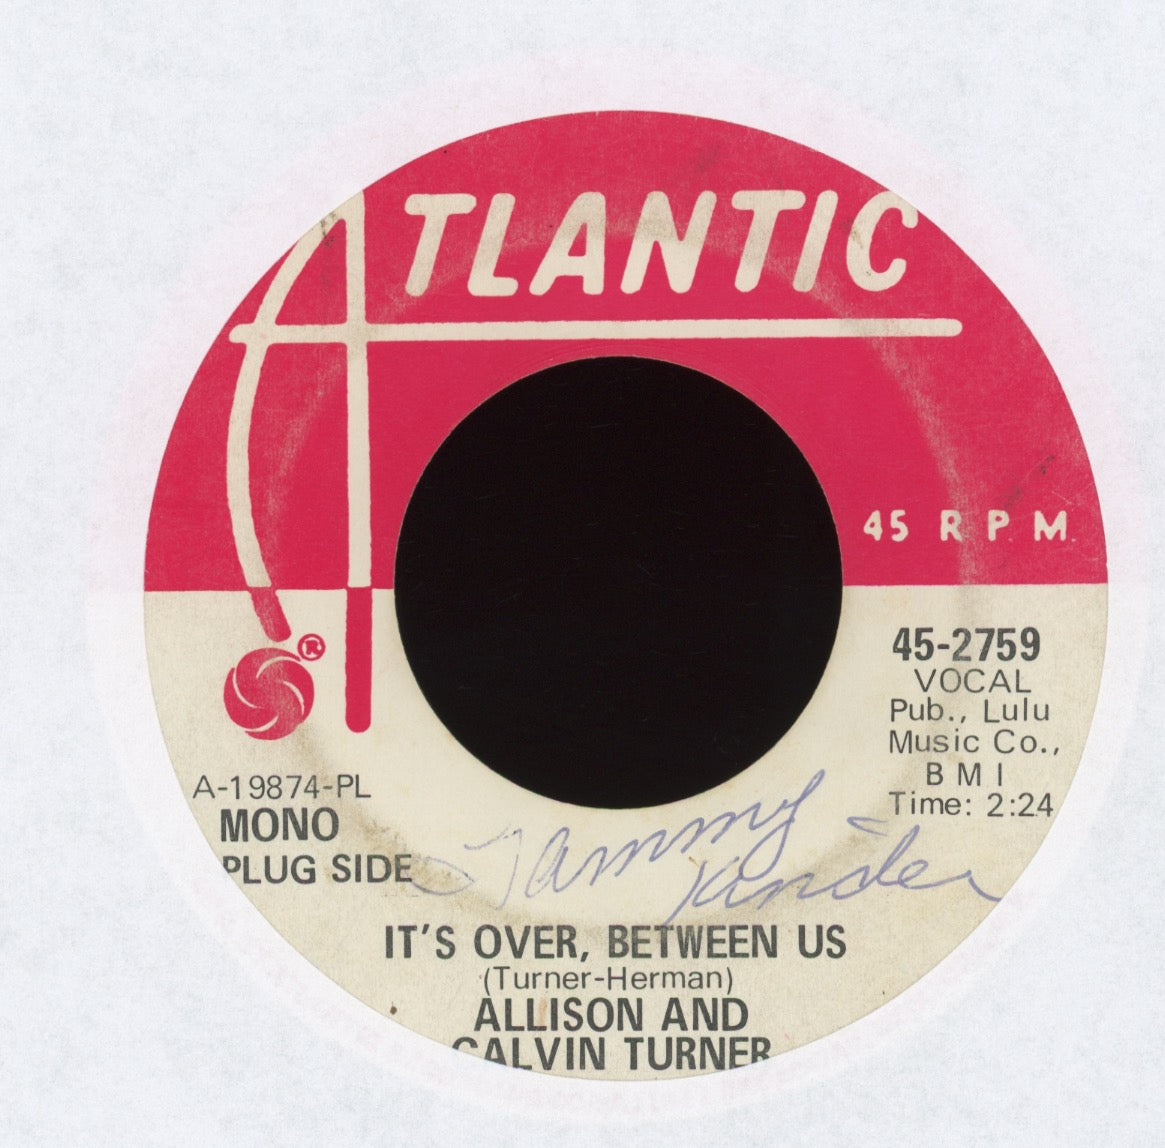 Allison and Calvin Turner - It's Over, Between Us on Atlantic Promo